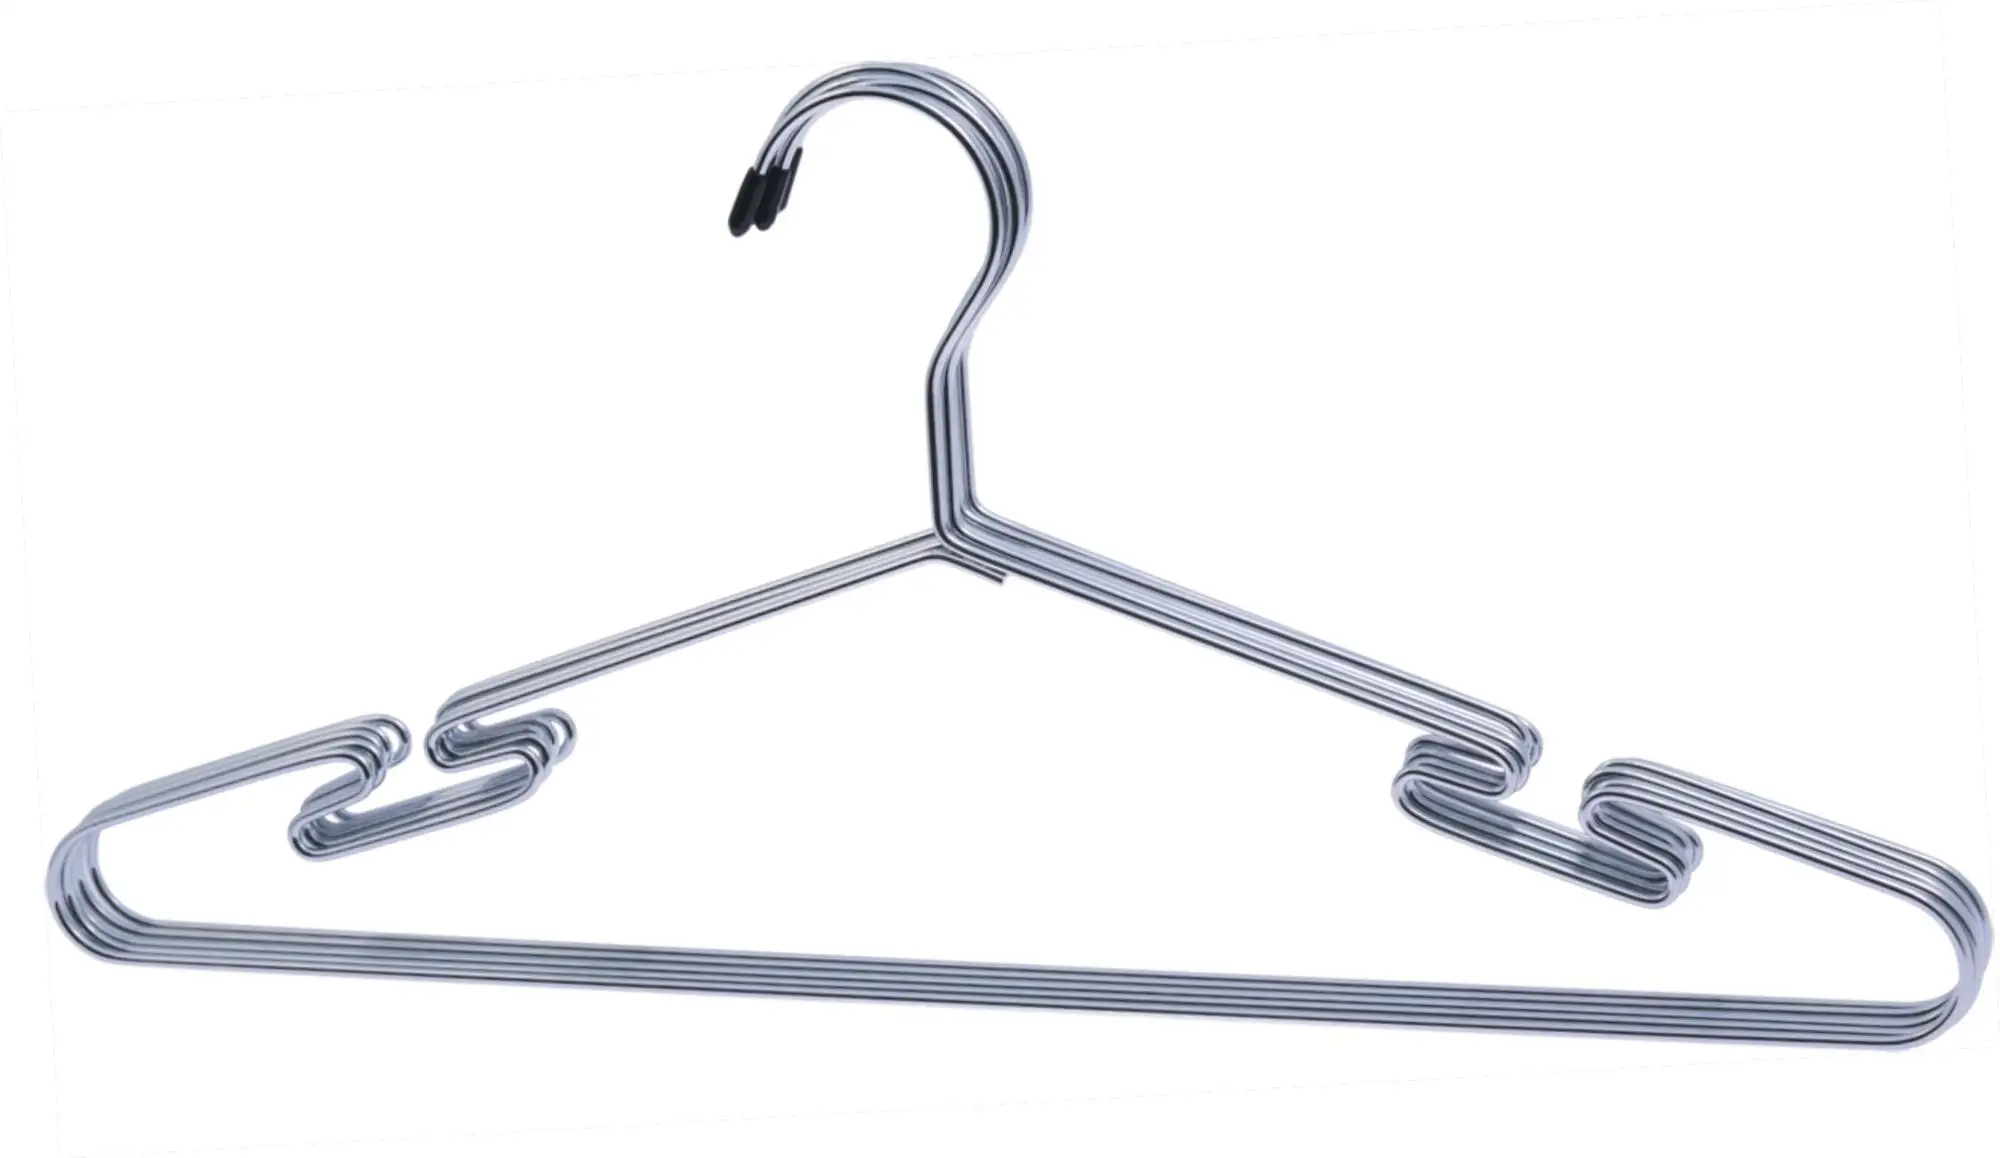 Metal Wire Clothes Rack Hanger,Laundry Clothes Hanger,Dry Cleaner Metal ...